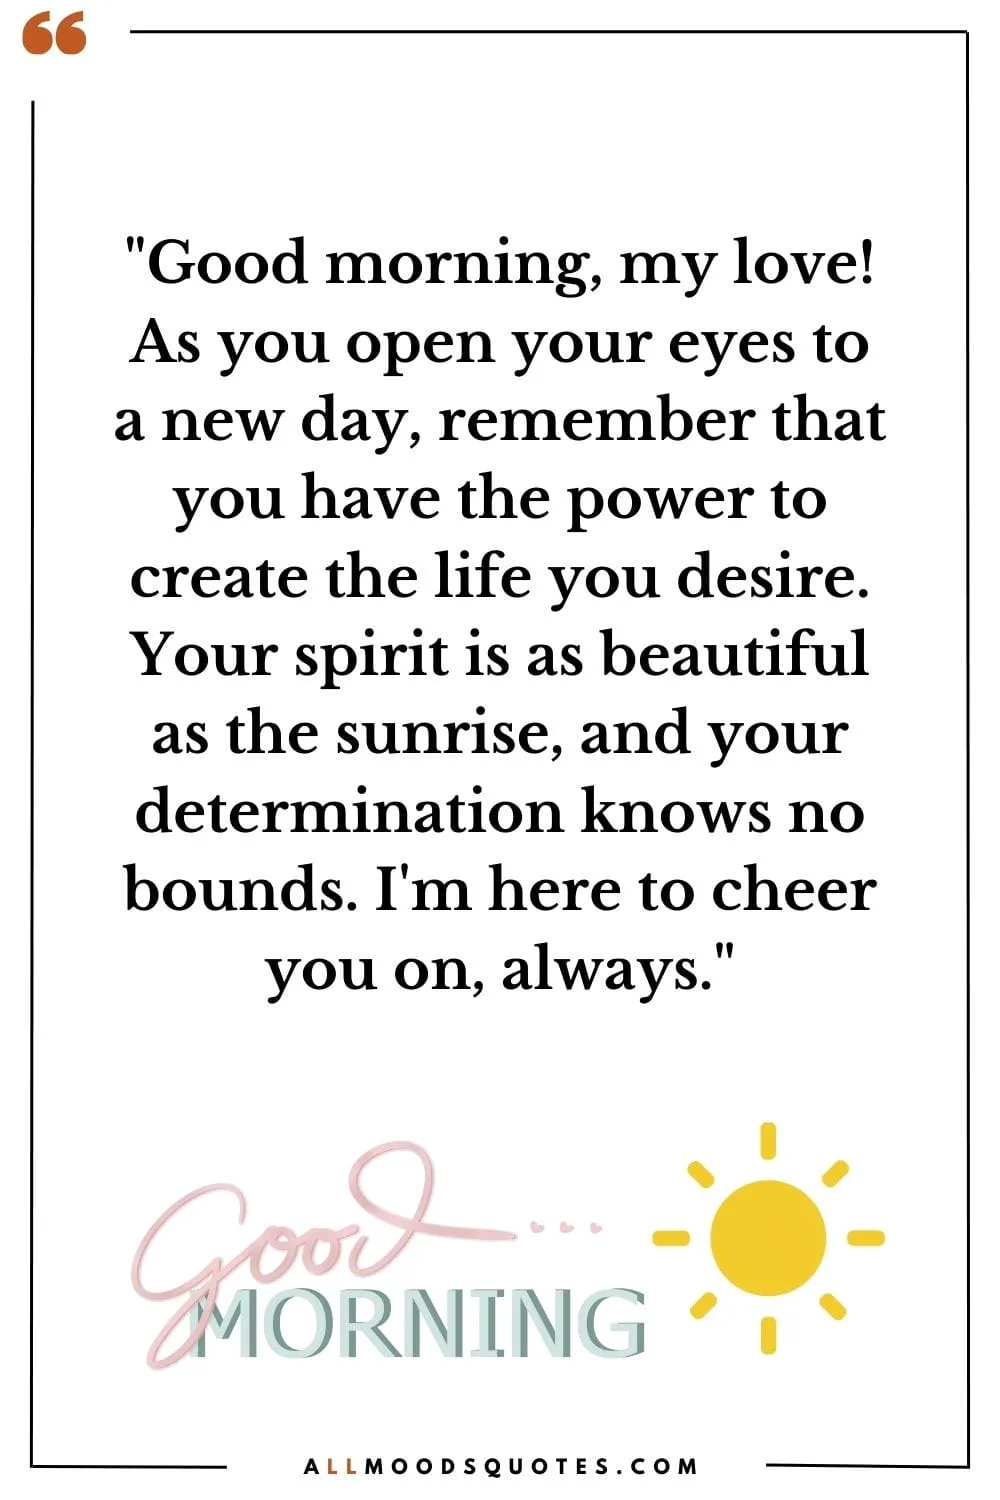 "Good morning, my love! As you open your eyes to a new day, remember that you have the power to create the life you desire. Your spirit is as beautiful as the sunrise, and your determination knows no bounds. I'm here to cheer you on, always."